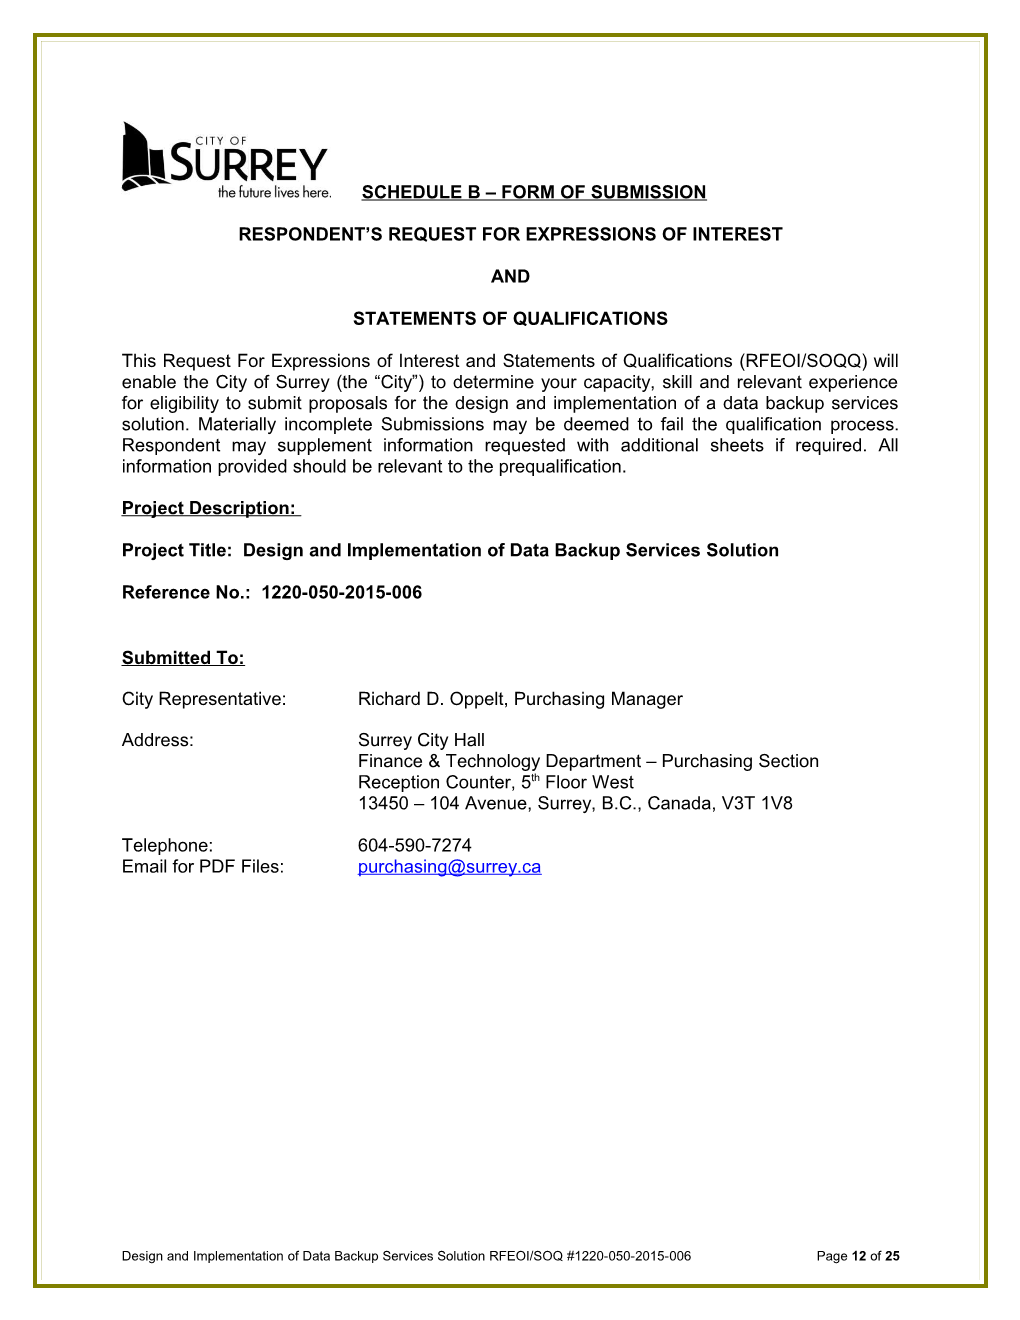 Request for Expressions of Interest & Statements of Qualifications